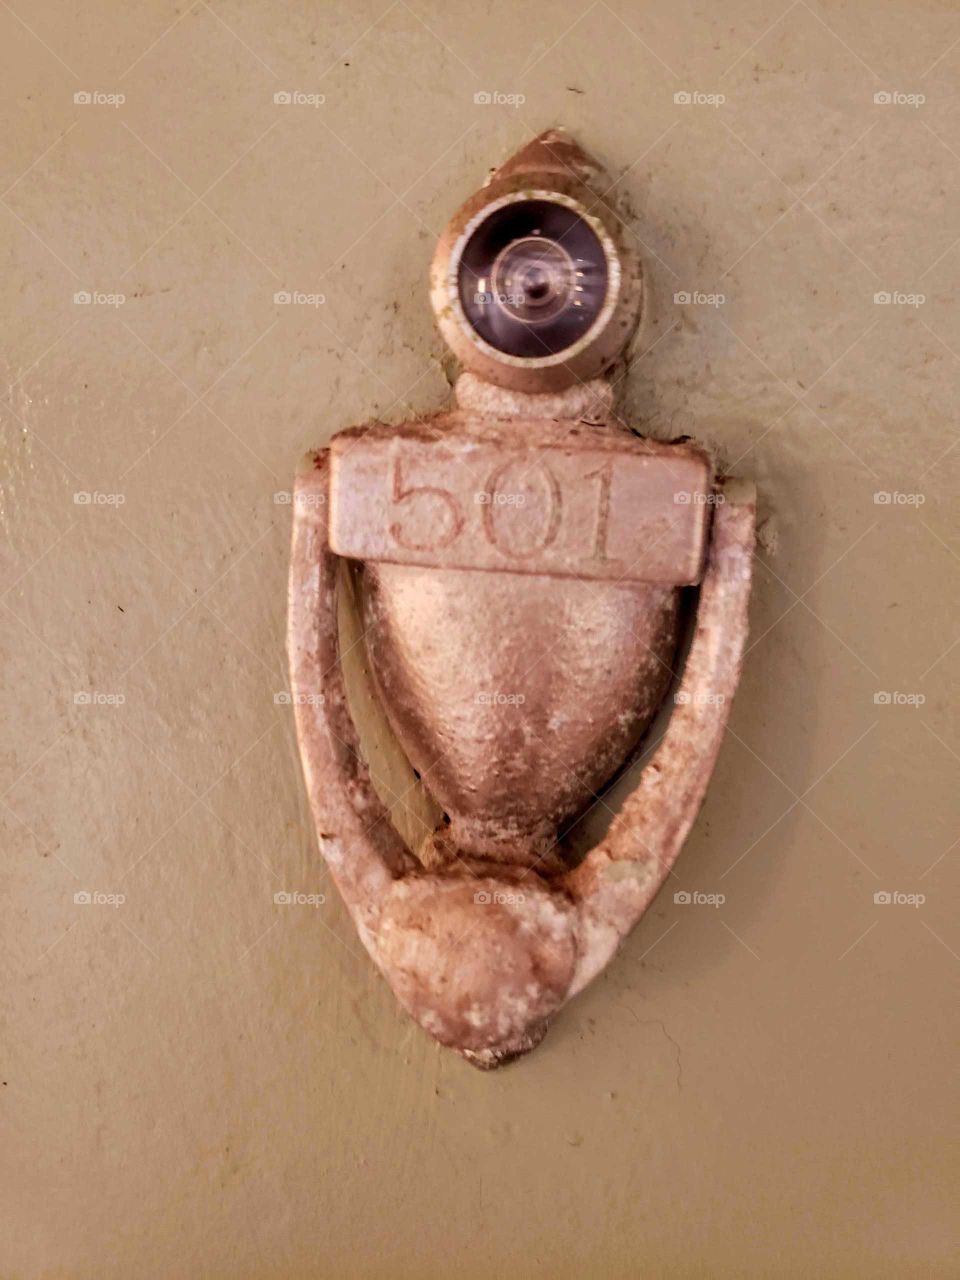 Brass door knocker, aged and roughened. Displaying the number 501 on an old metal door.